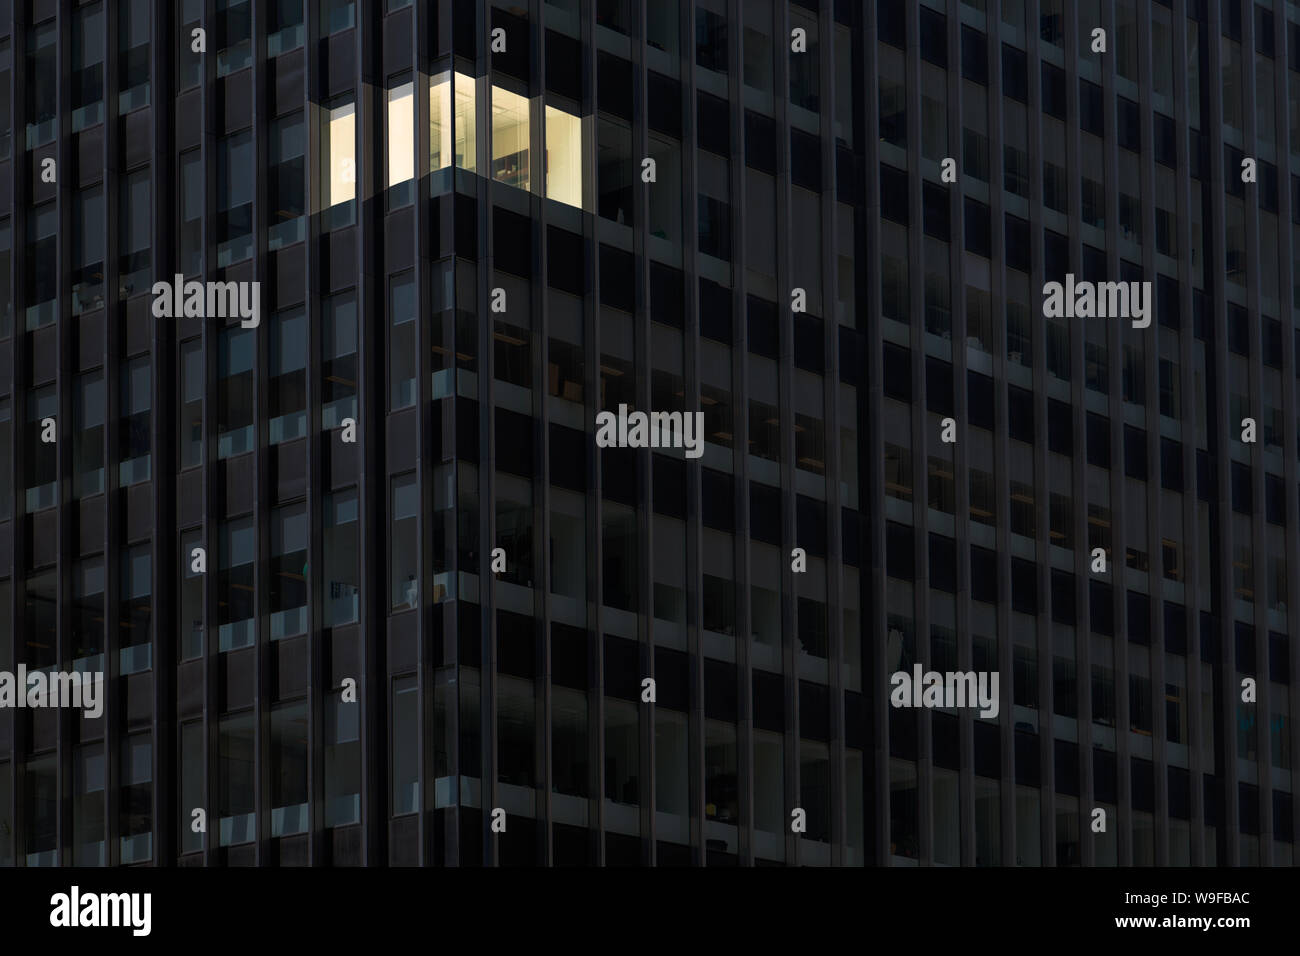 Corner office with lights on and windows glowing in a darkened office building at night indicating someone working overtime late at night Stock Photo